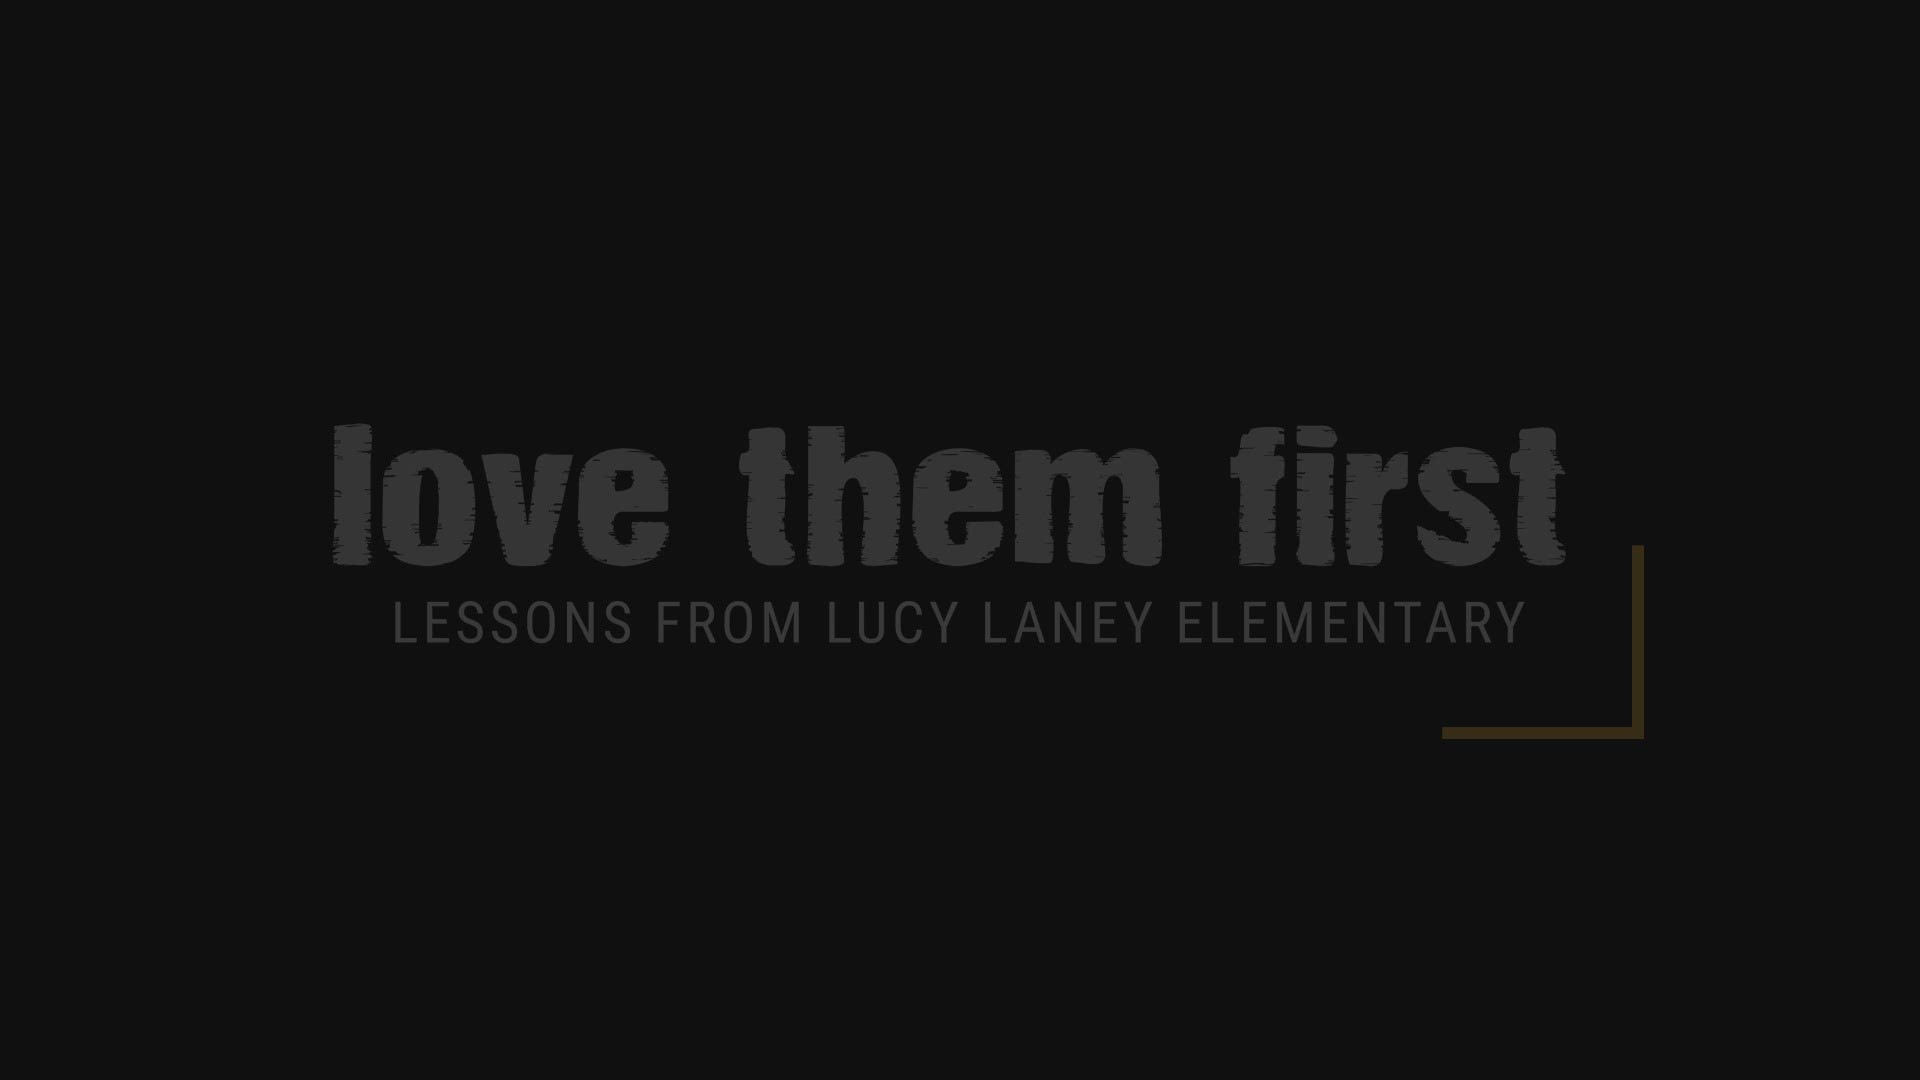 With unprecedented access over the course of a year, "Love Them First: Lessons from Lucy Laney Elementary" follows the determination of a charismatic north Minneapolis school principal, Mauri Melander Friestleben, as she sets out to undo history. Lucy Laney has been at the bottom of the state's list of underperforming schools for two decades.